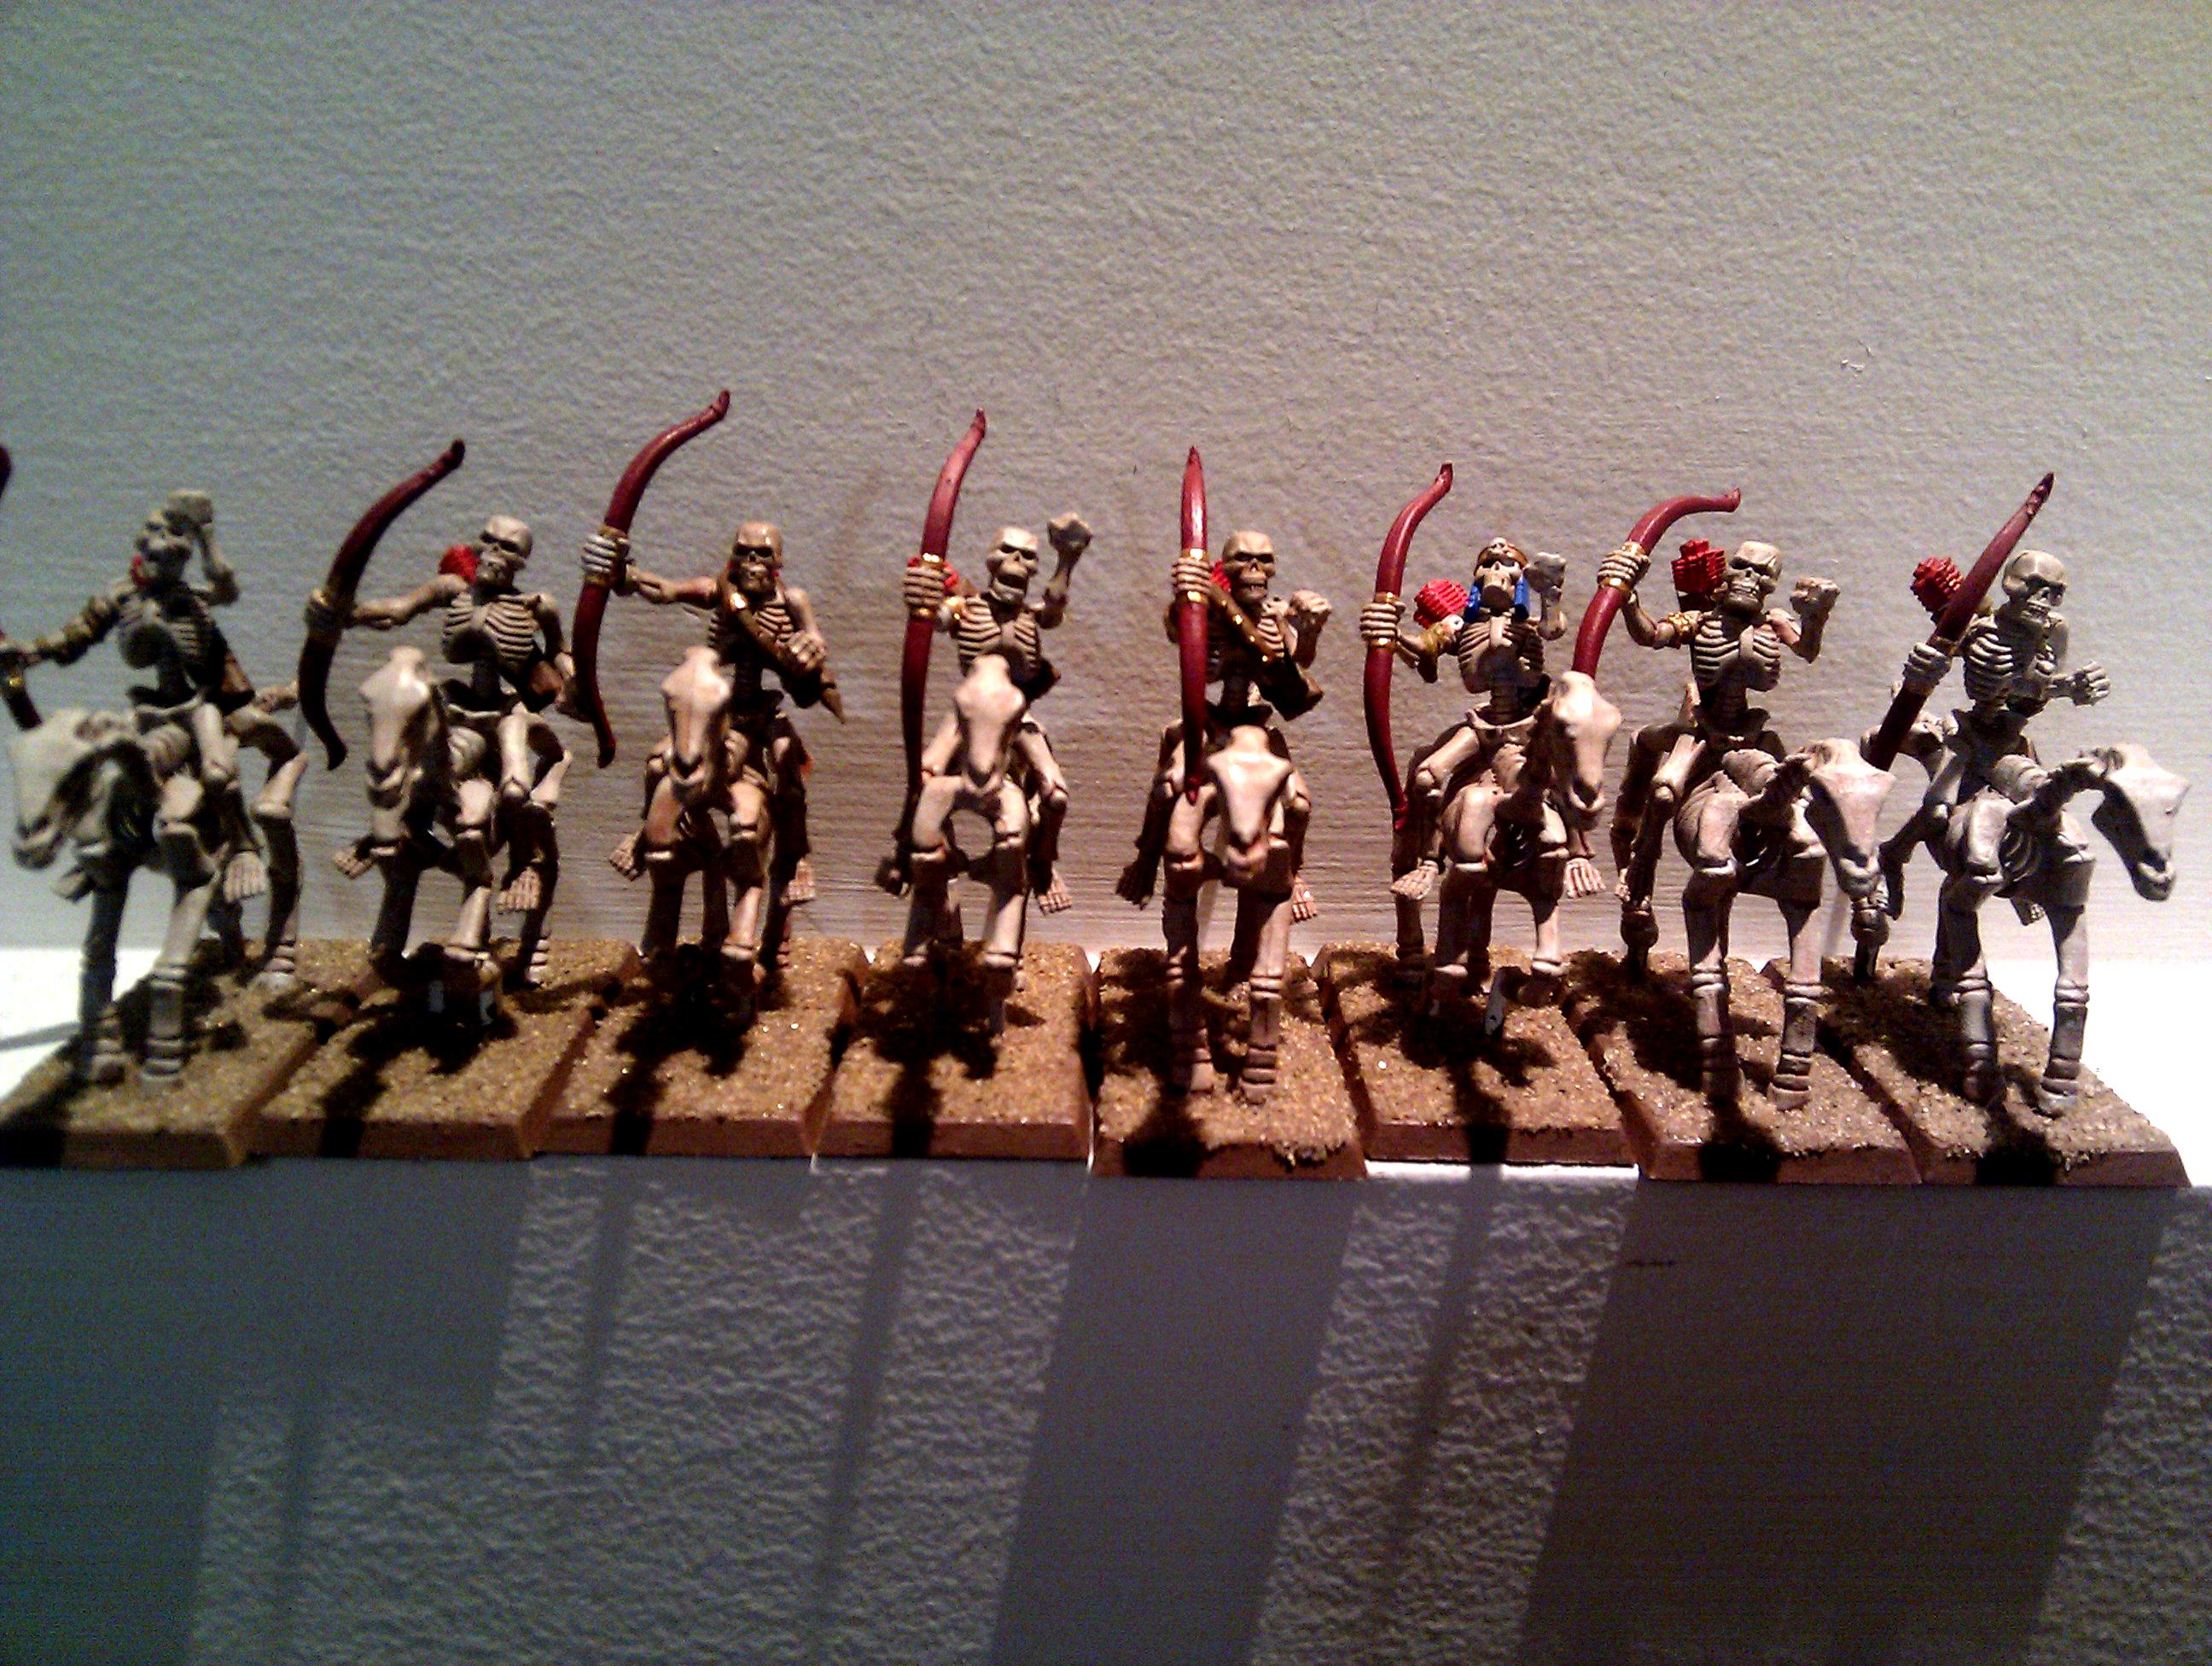 Archers, Cavalry, Skeletons